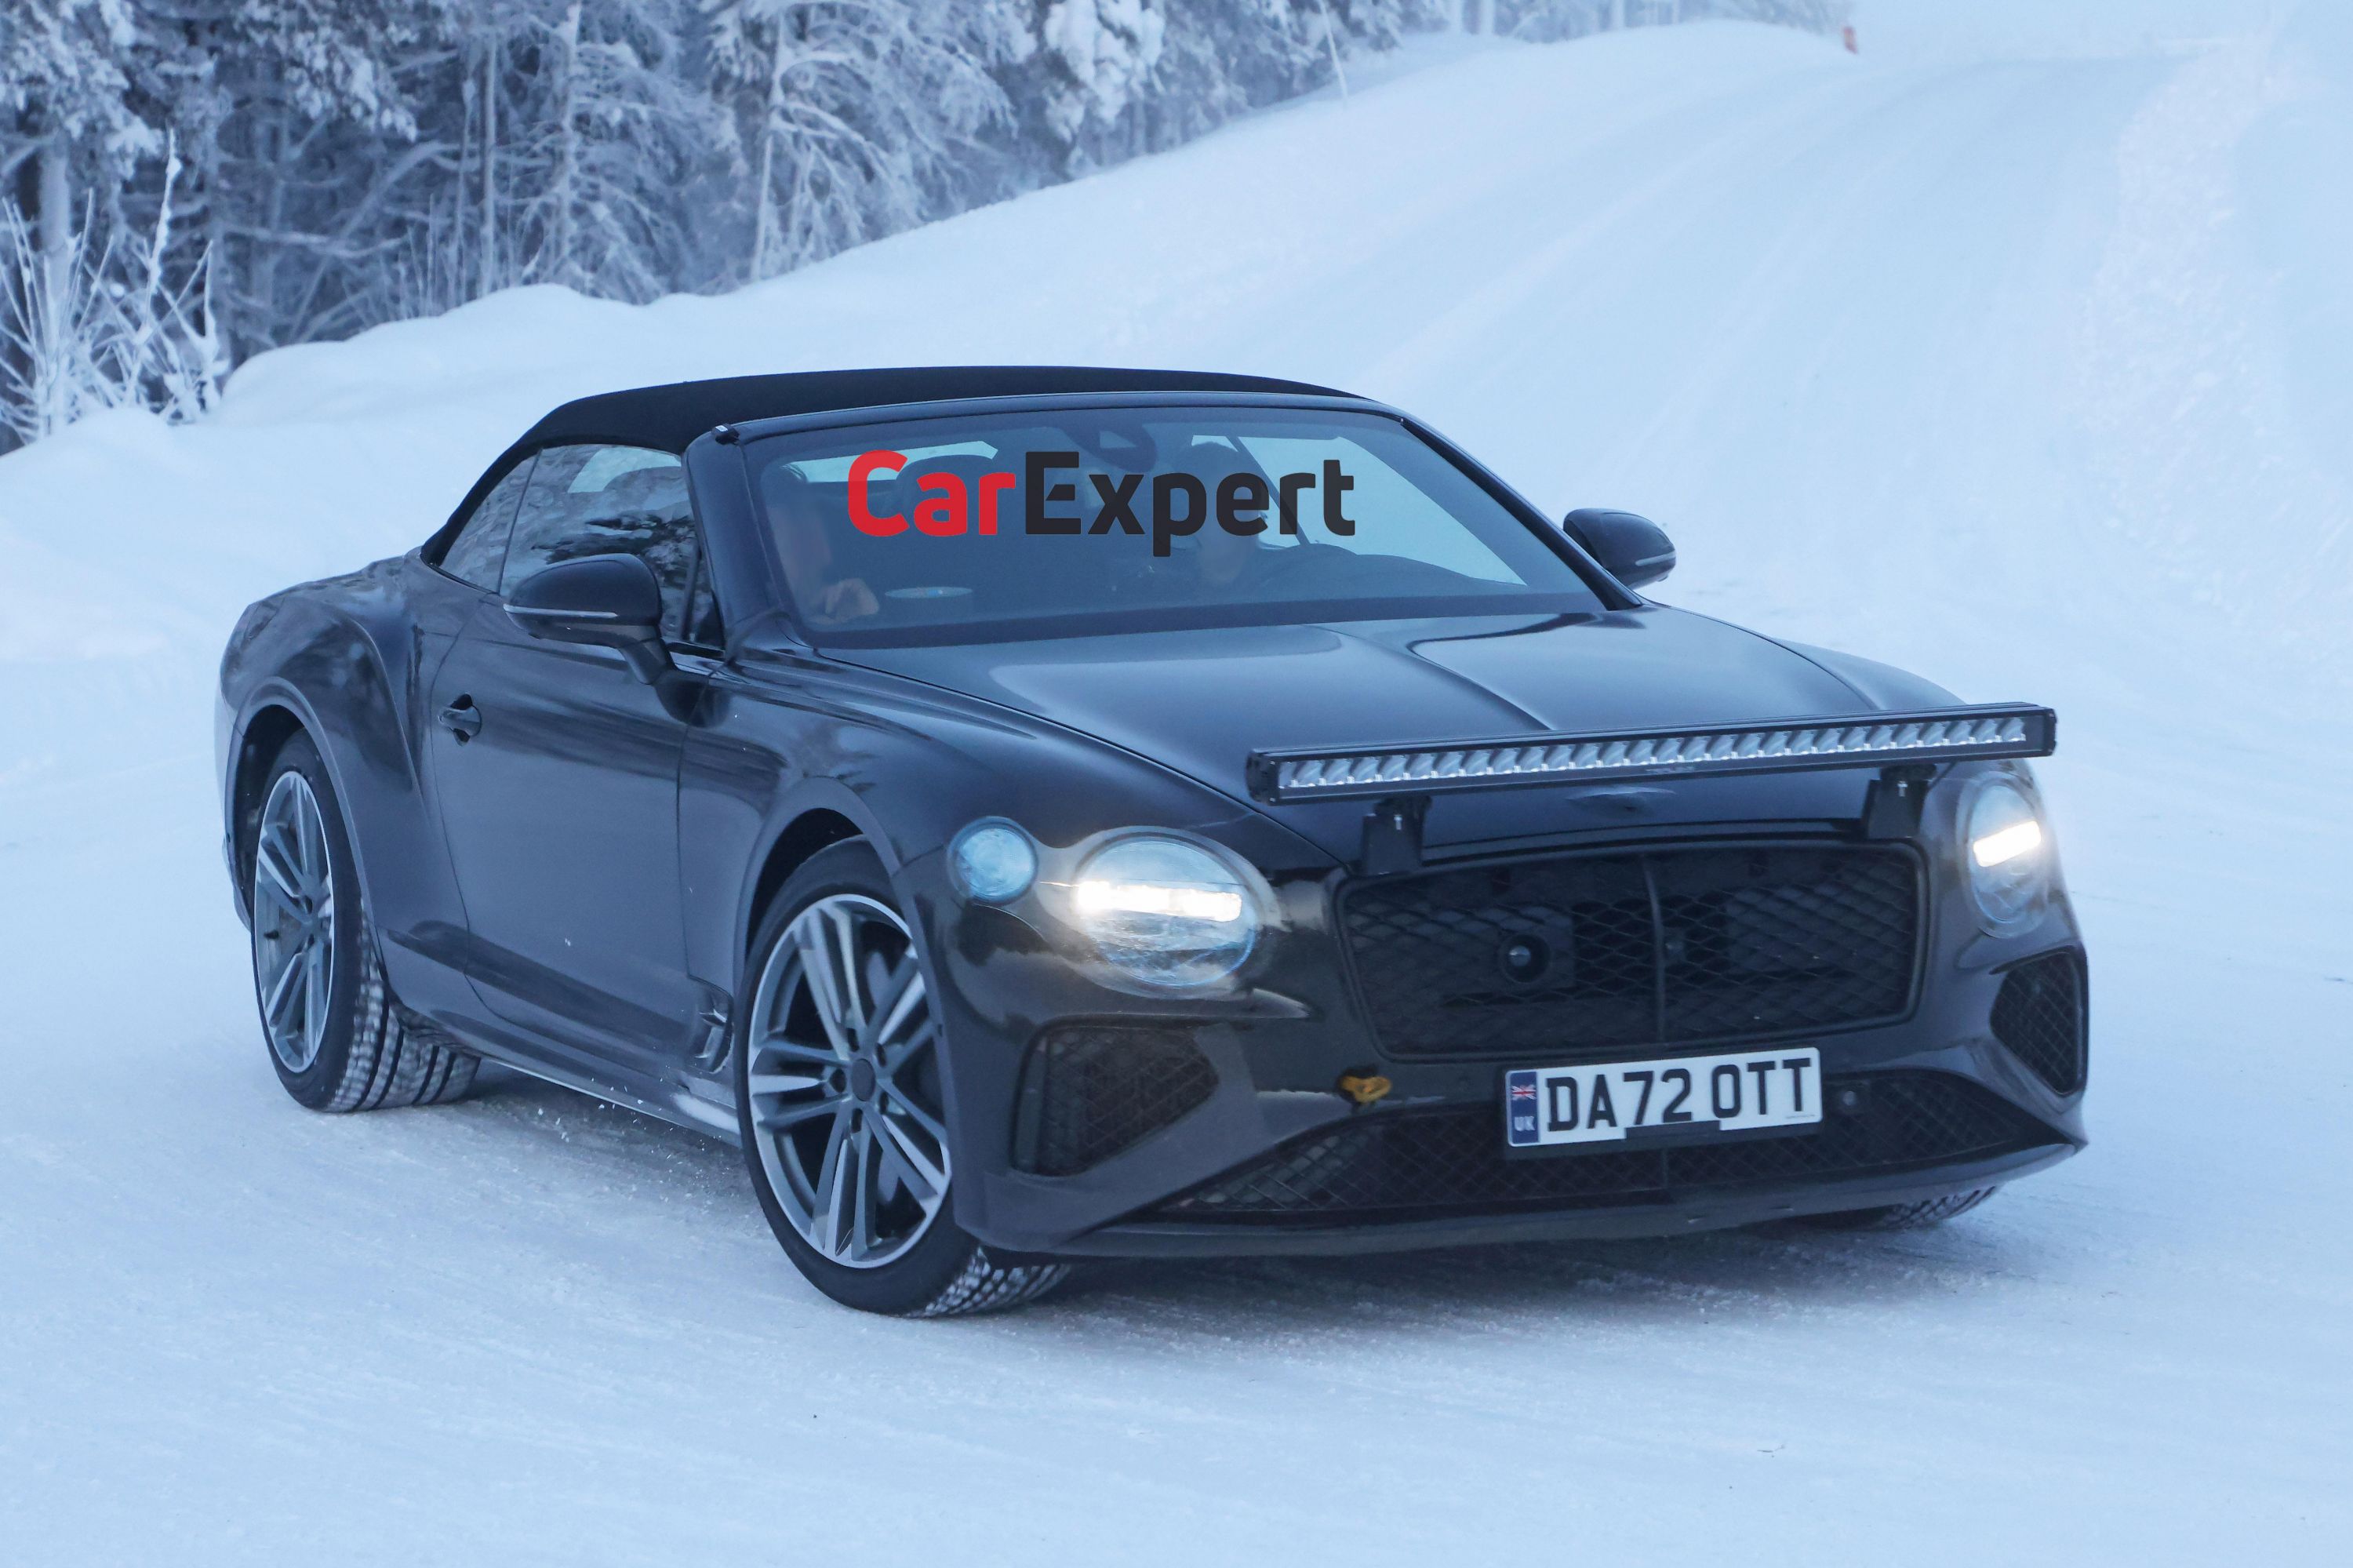 2024 Bentley Continental GT and GTC facelift spied CarExpert